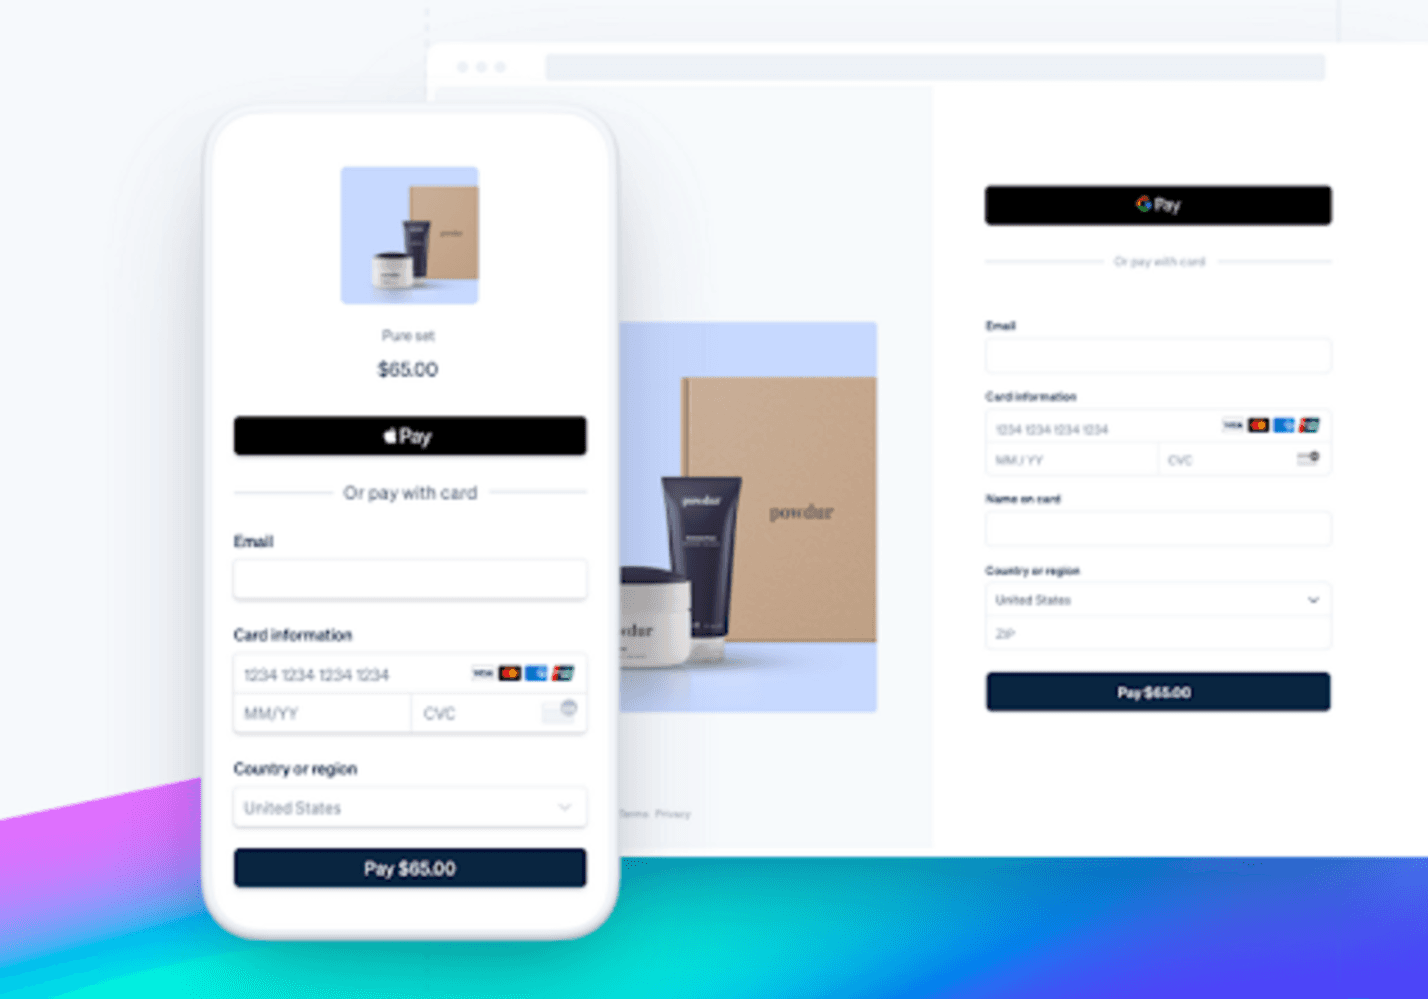 An image of a well-designed Shopify checkout page. A smooth checkout process reduces cart abandonment.